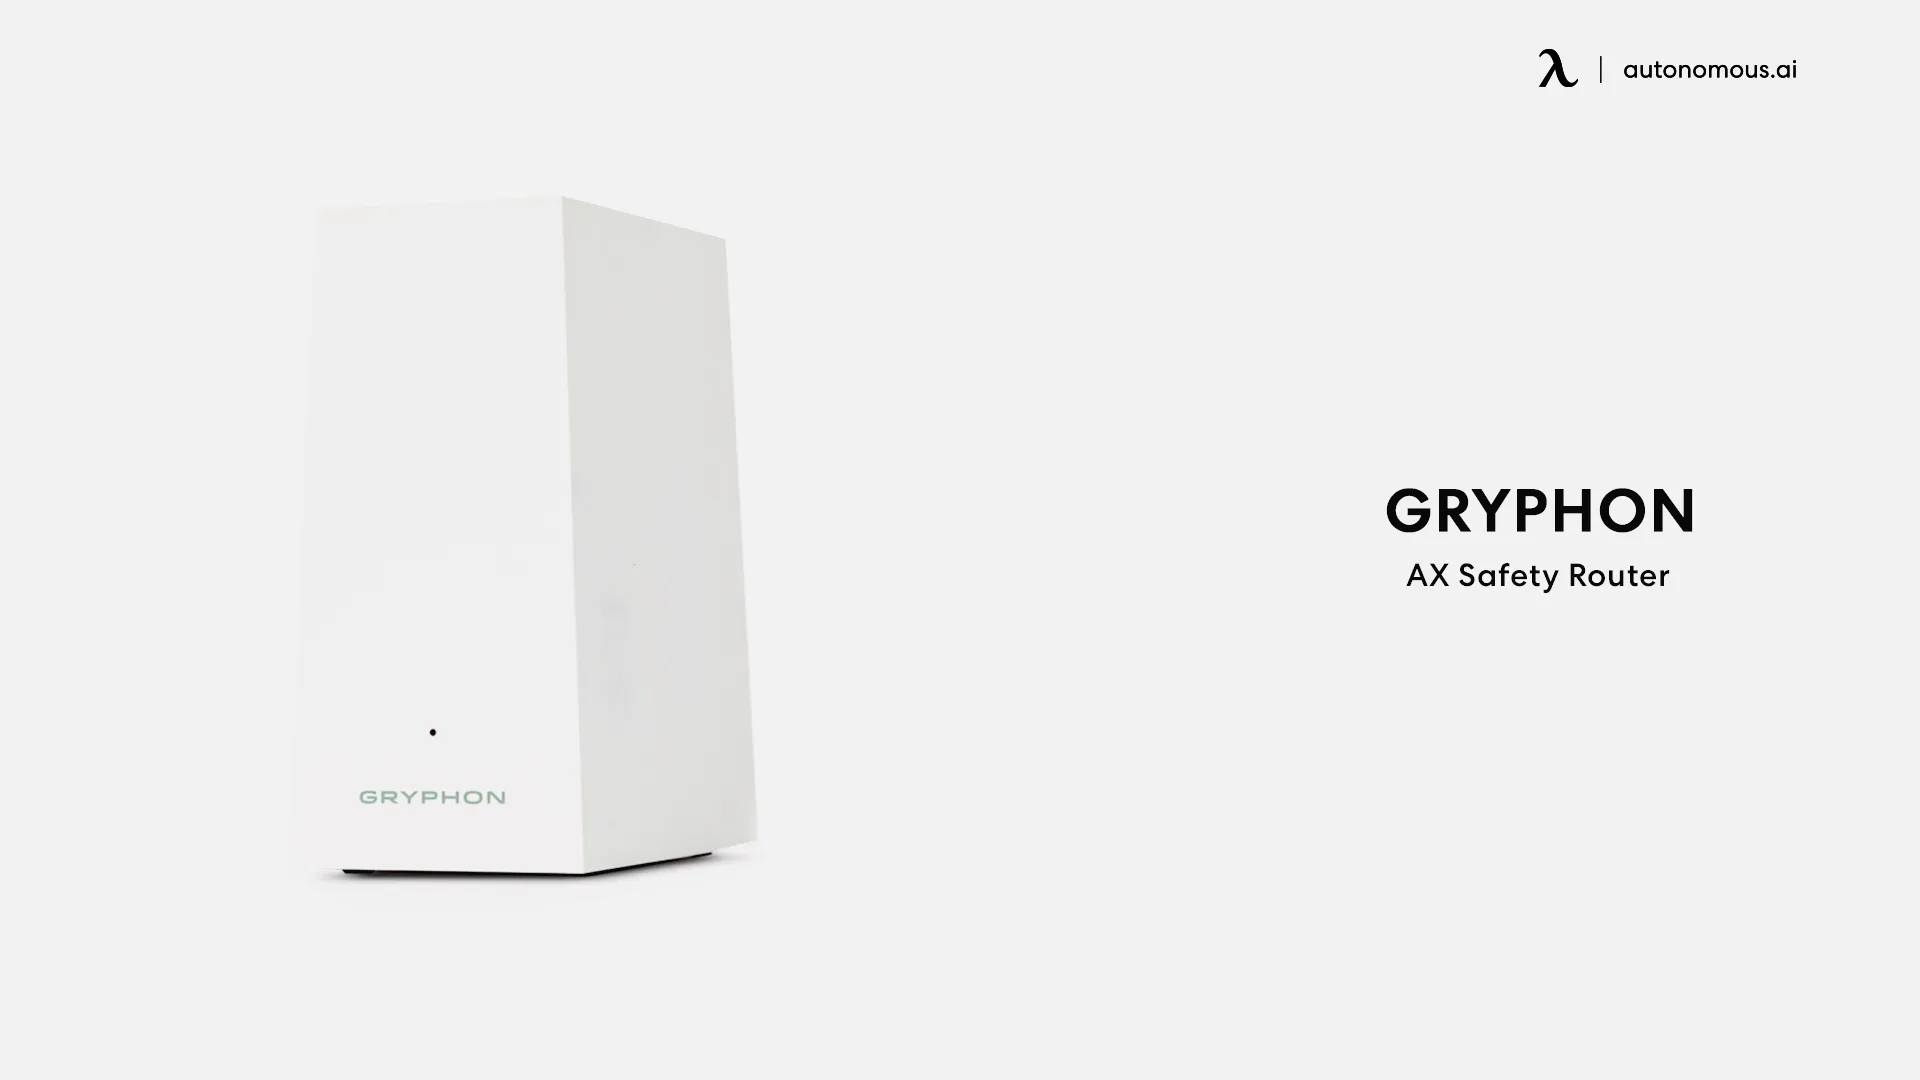 Gryphon AX Safety Router smart home appliance